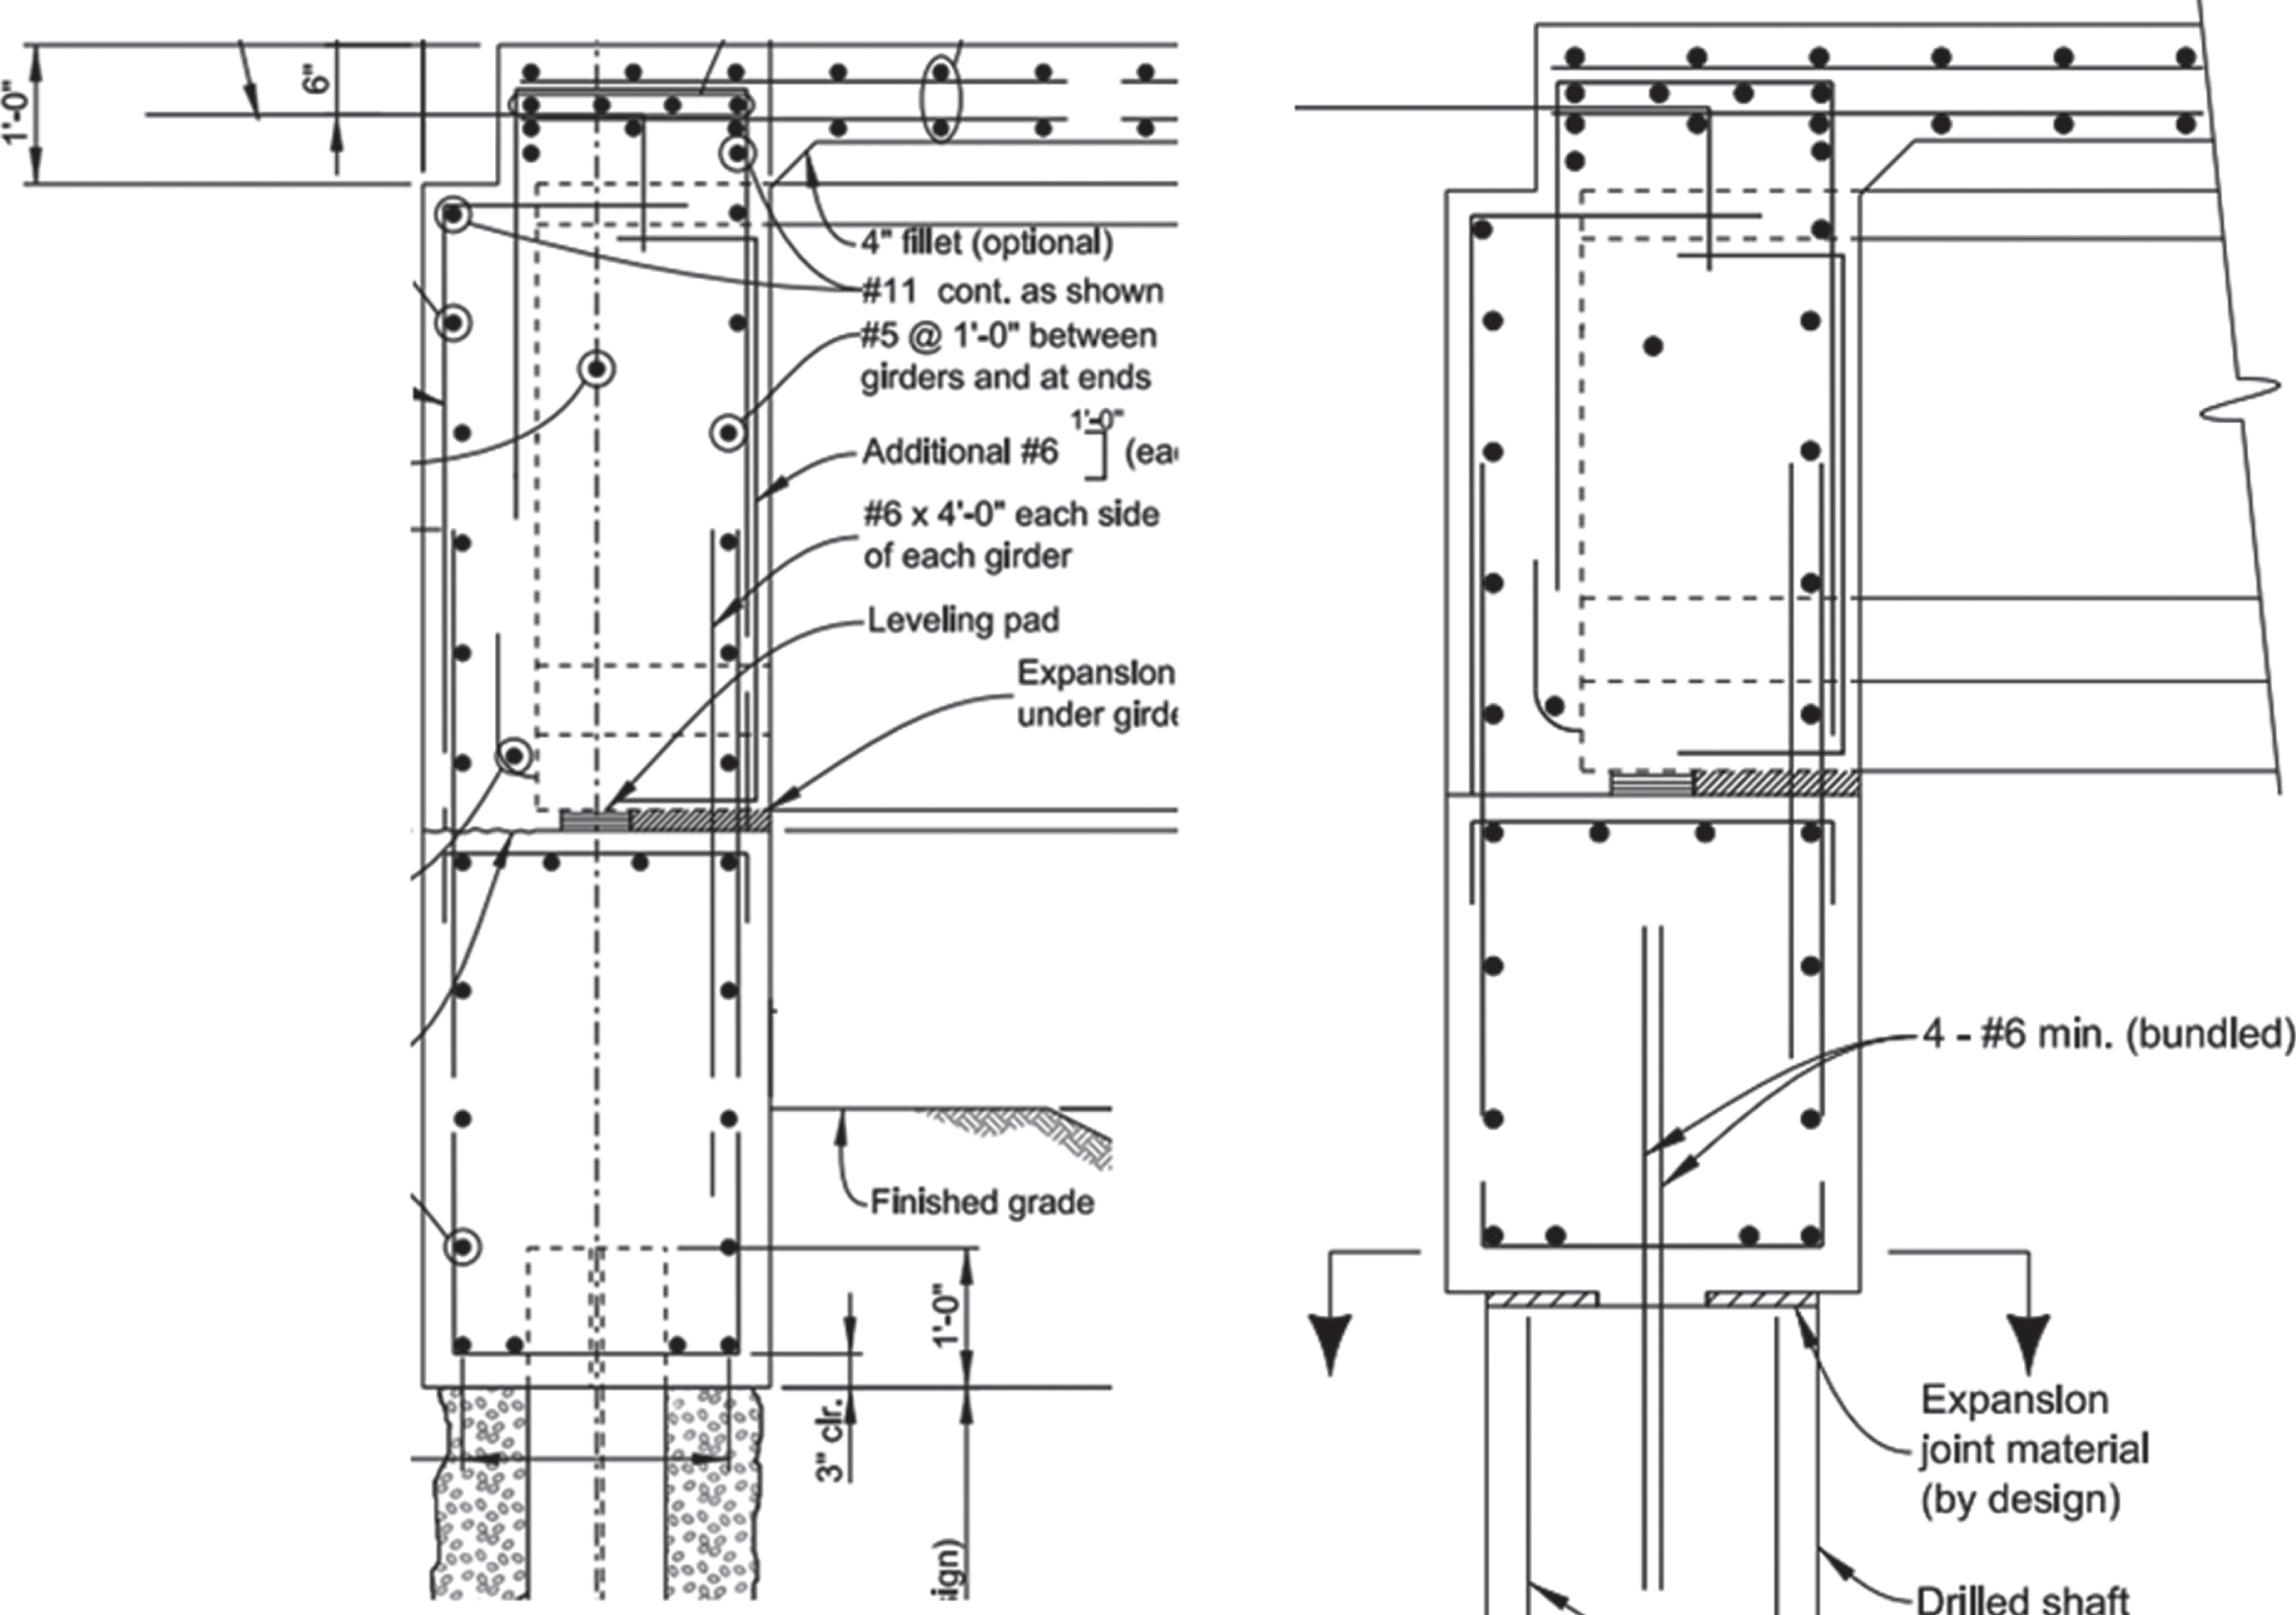 CDOT integral abutment details for H piles (left) and drilled shafts (right) [18].